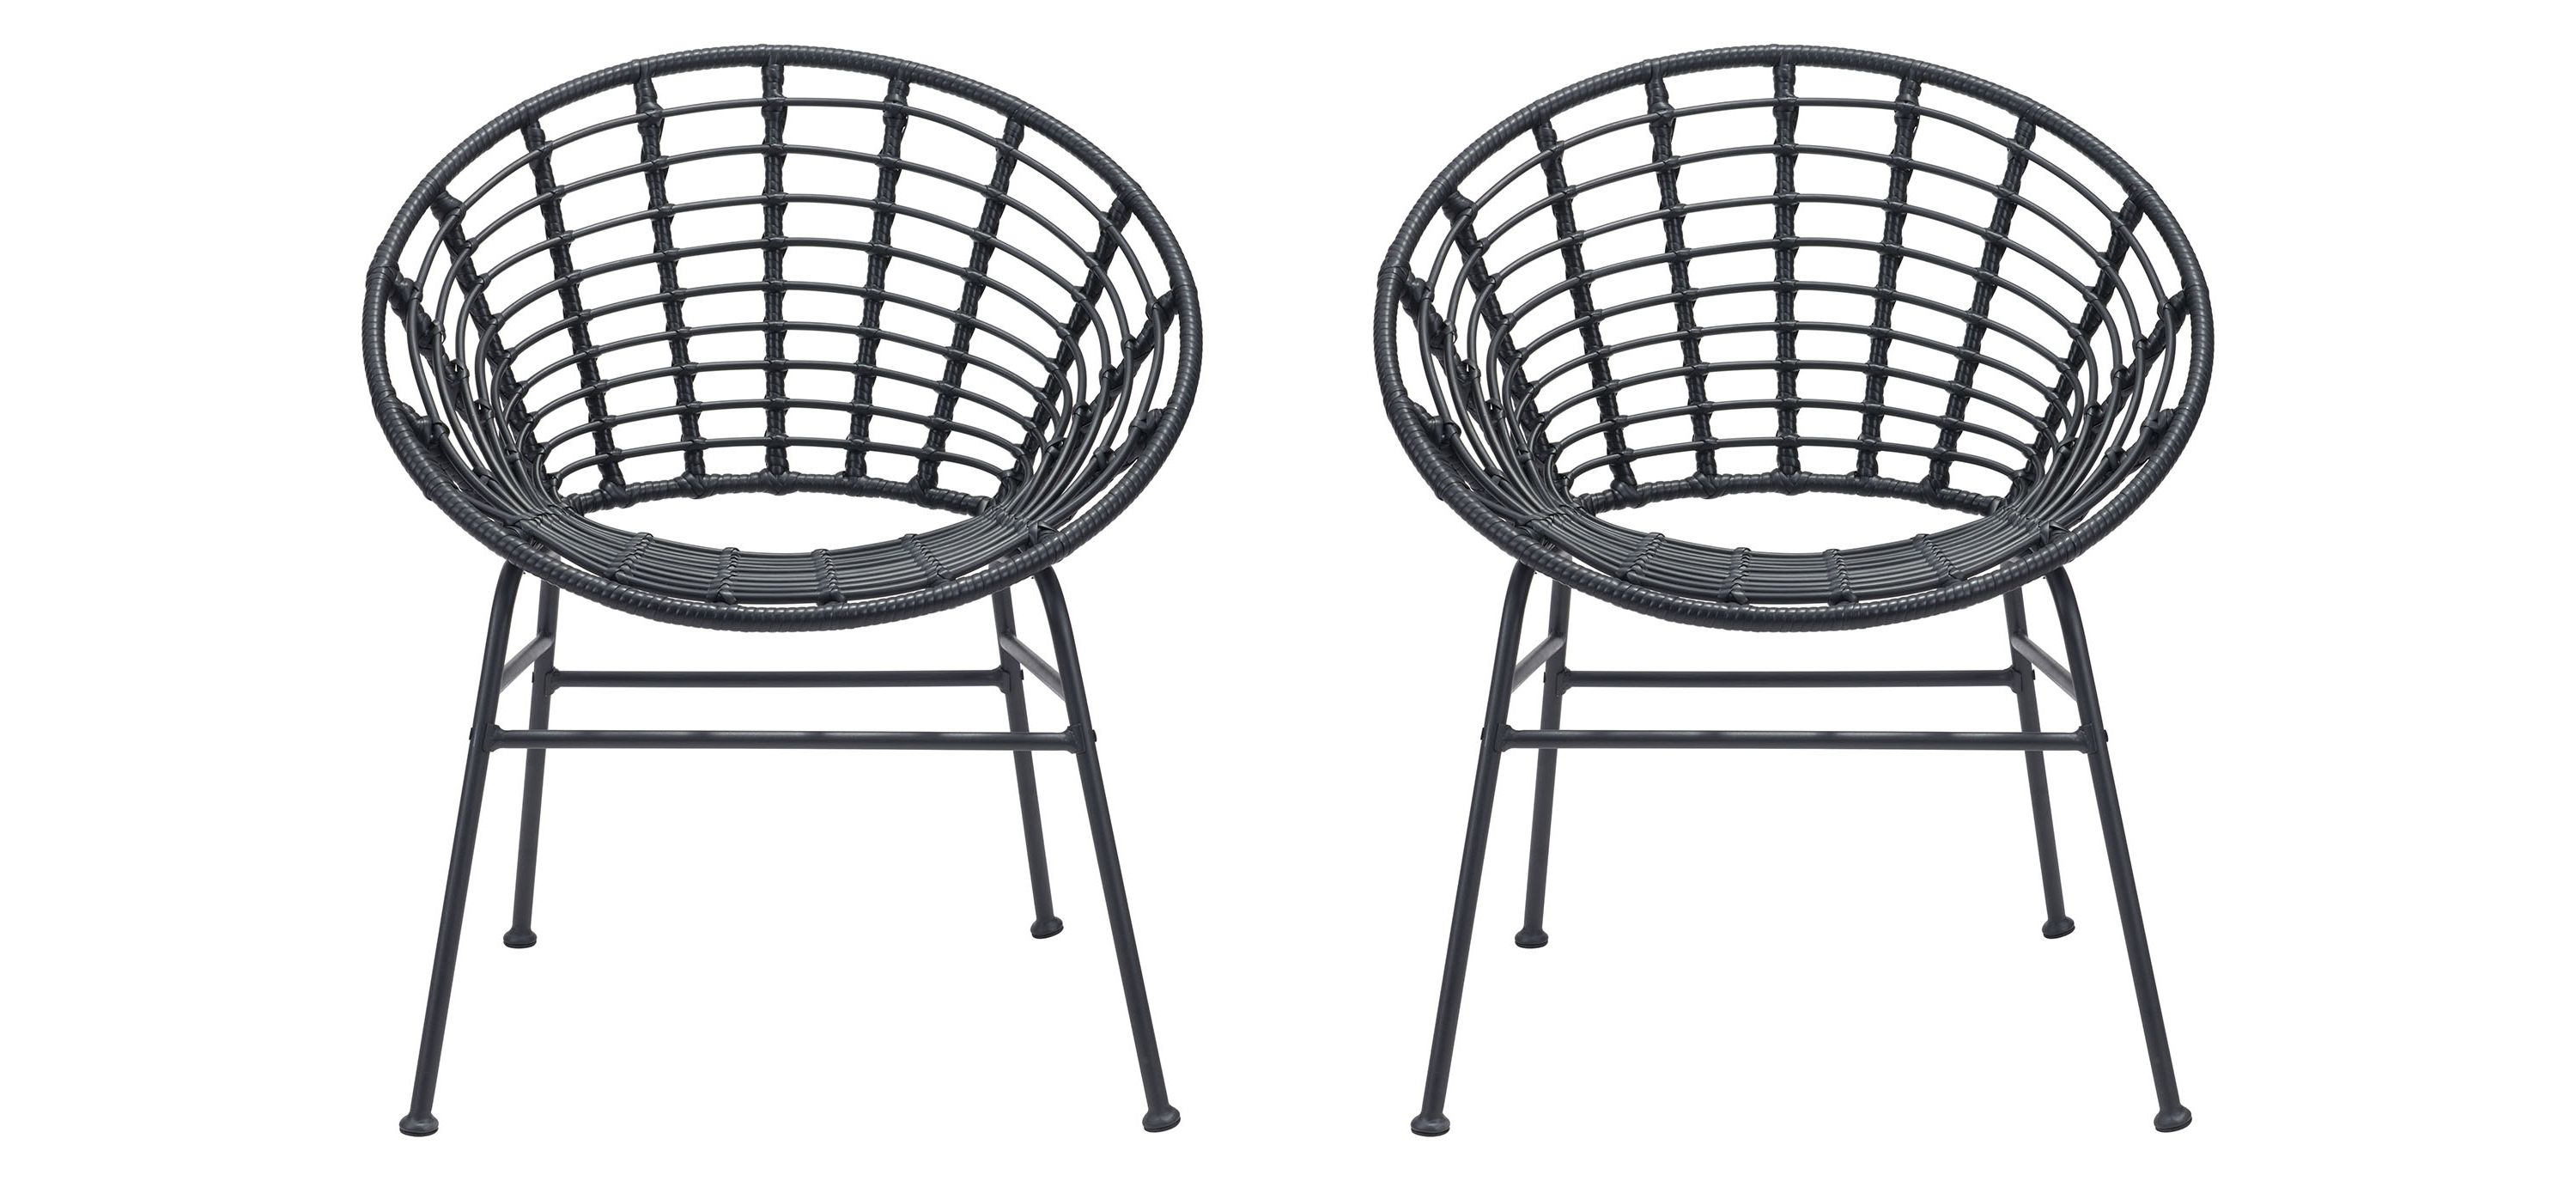 Corde Outdoor Dining Chair - Set of 2